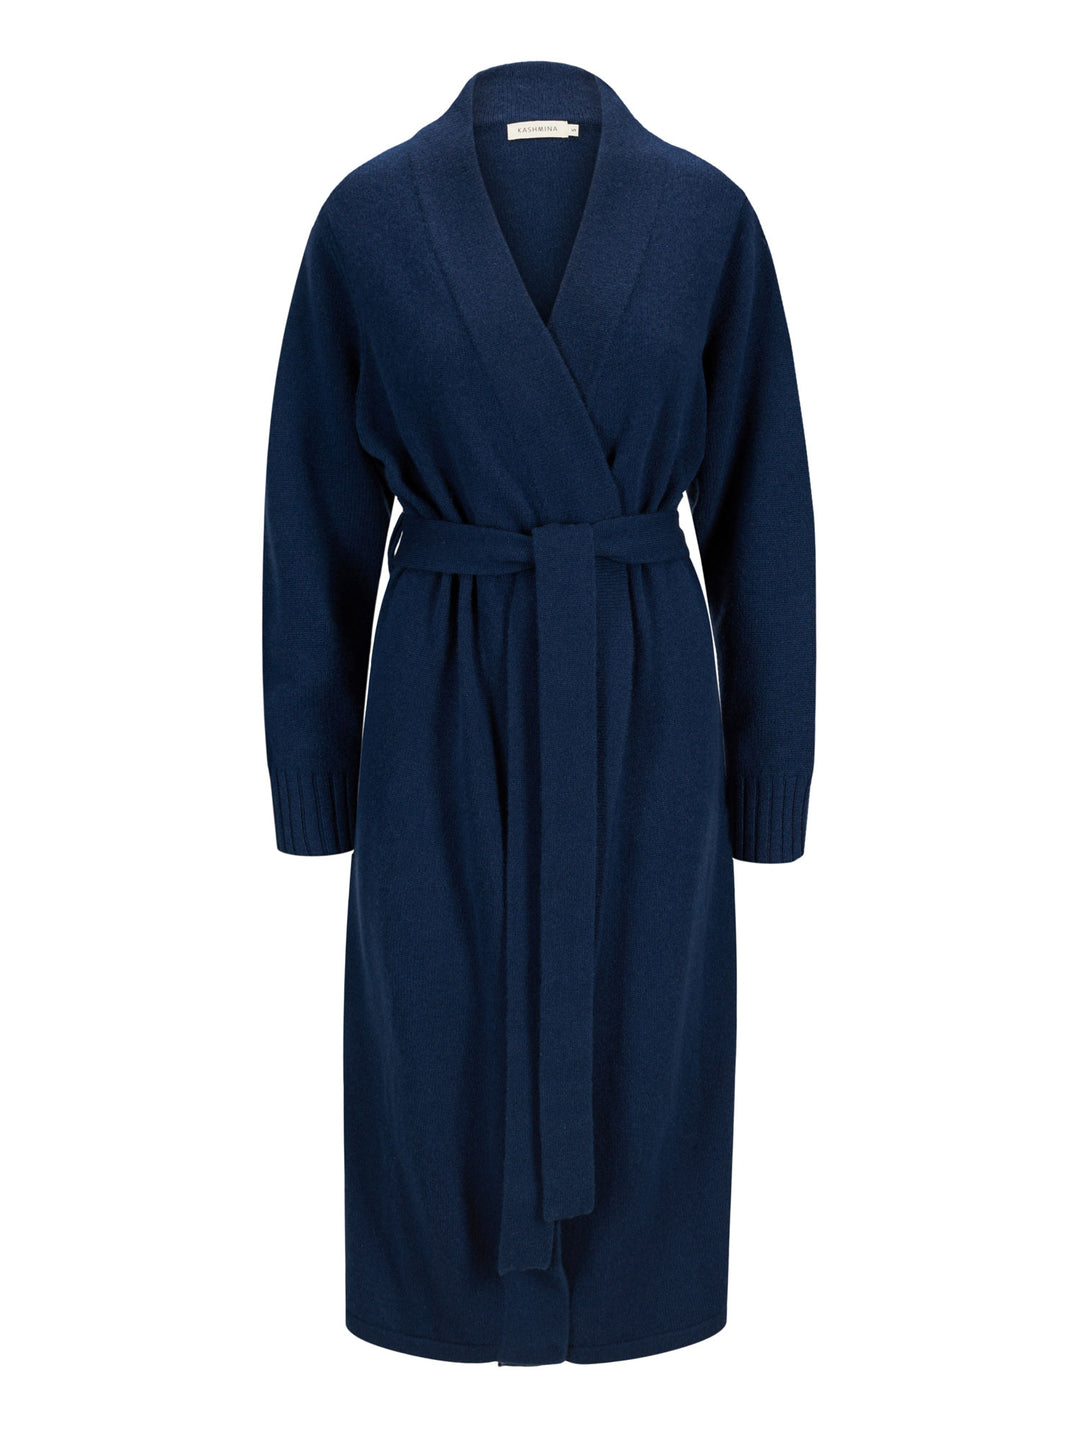 cashmere robe from kashmina, 100% pure cashmere wool, comfort, mountain blue.